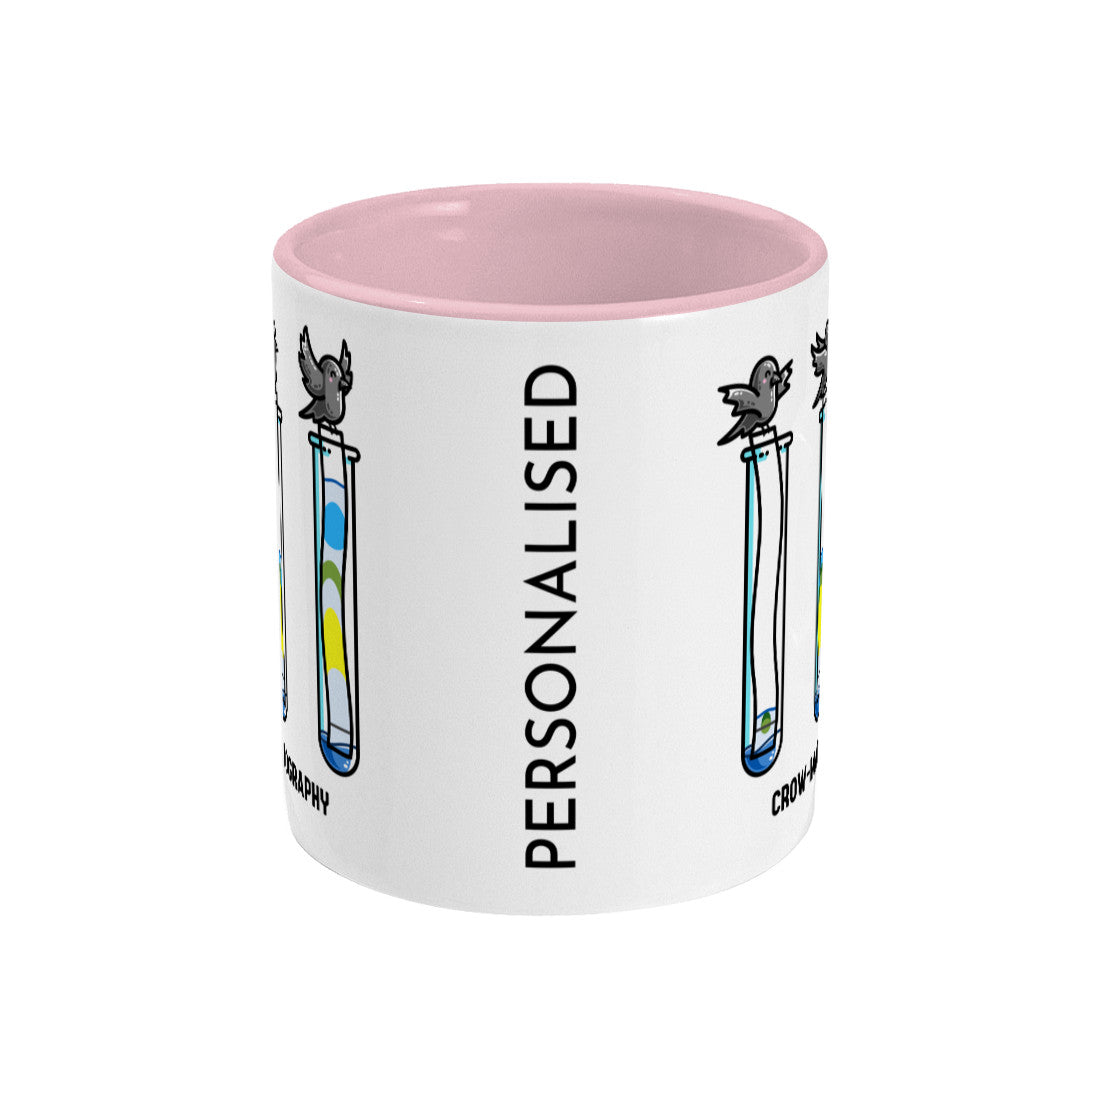 A two toned white and pink ceramic mug seen side on with the handle hidden behind and a portion of the design visible at each edge of the mug with the word personalised vertically between.